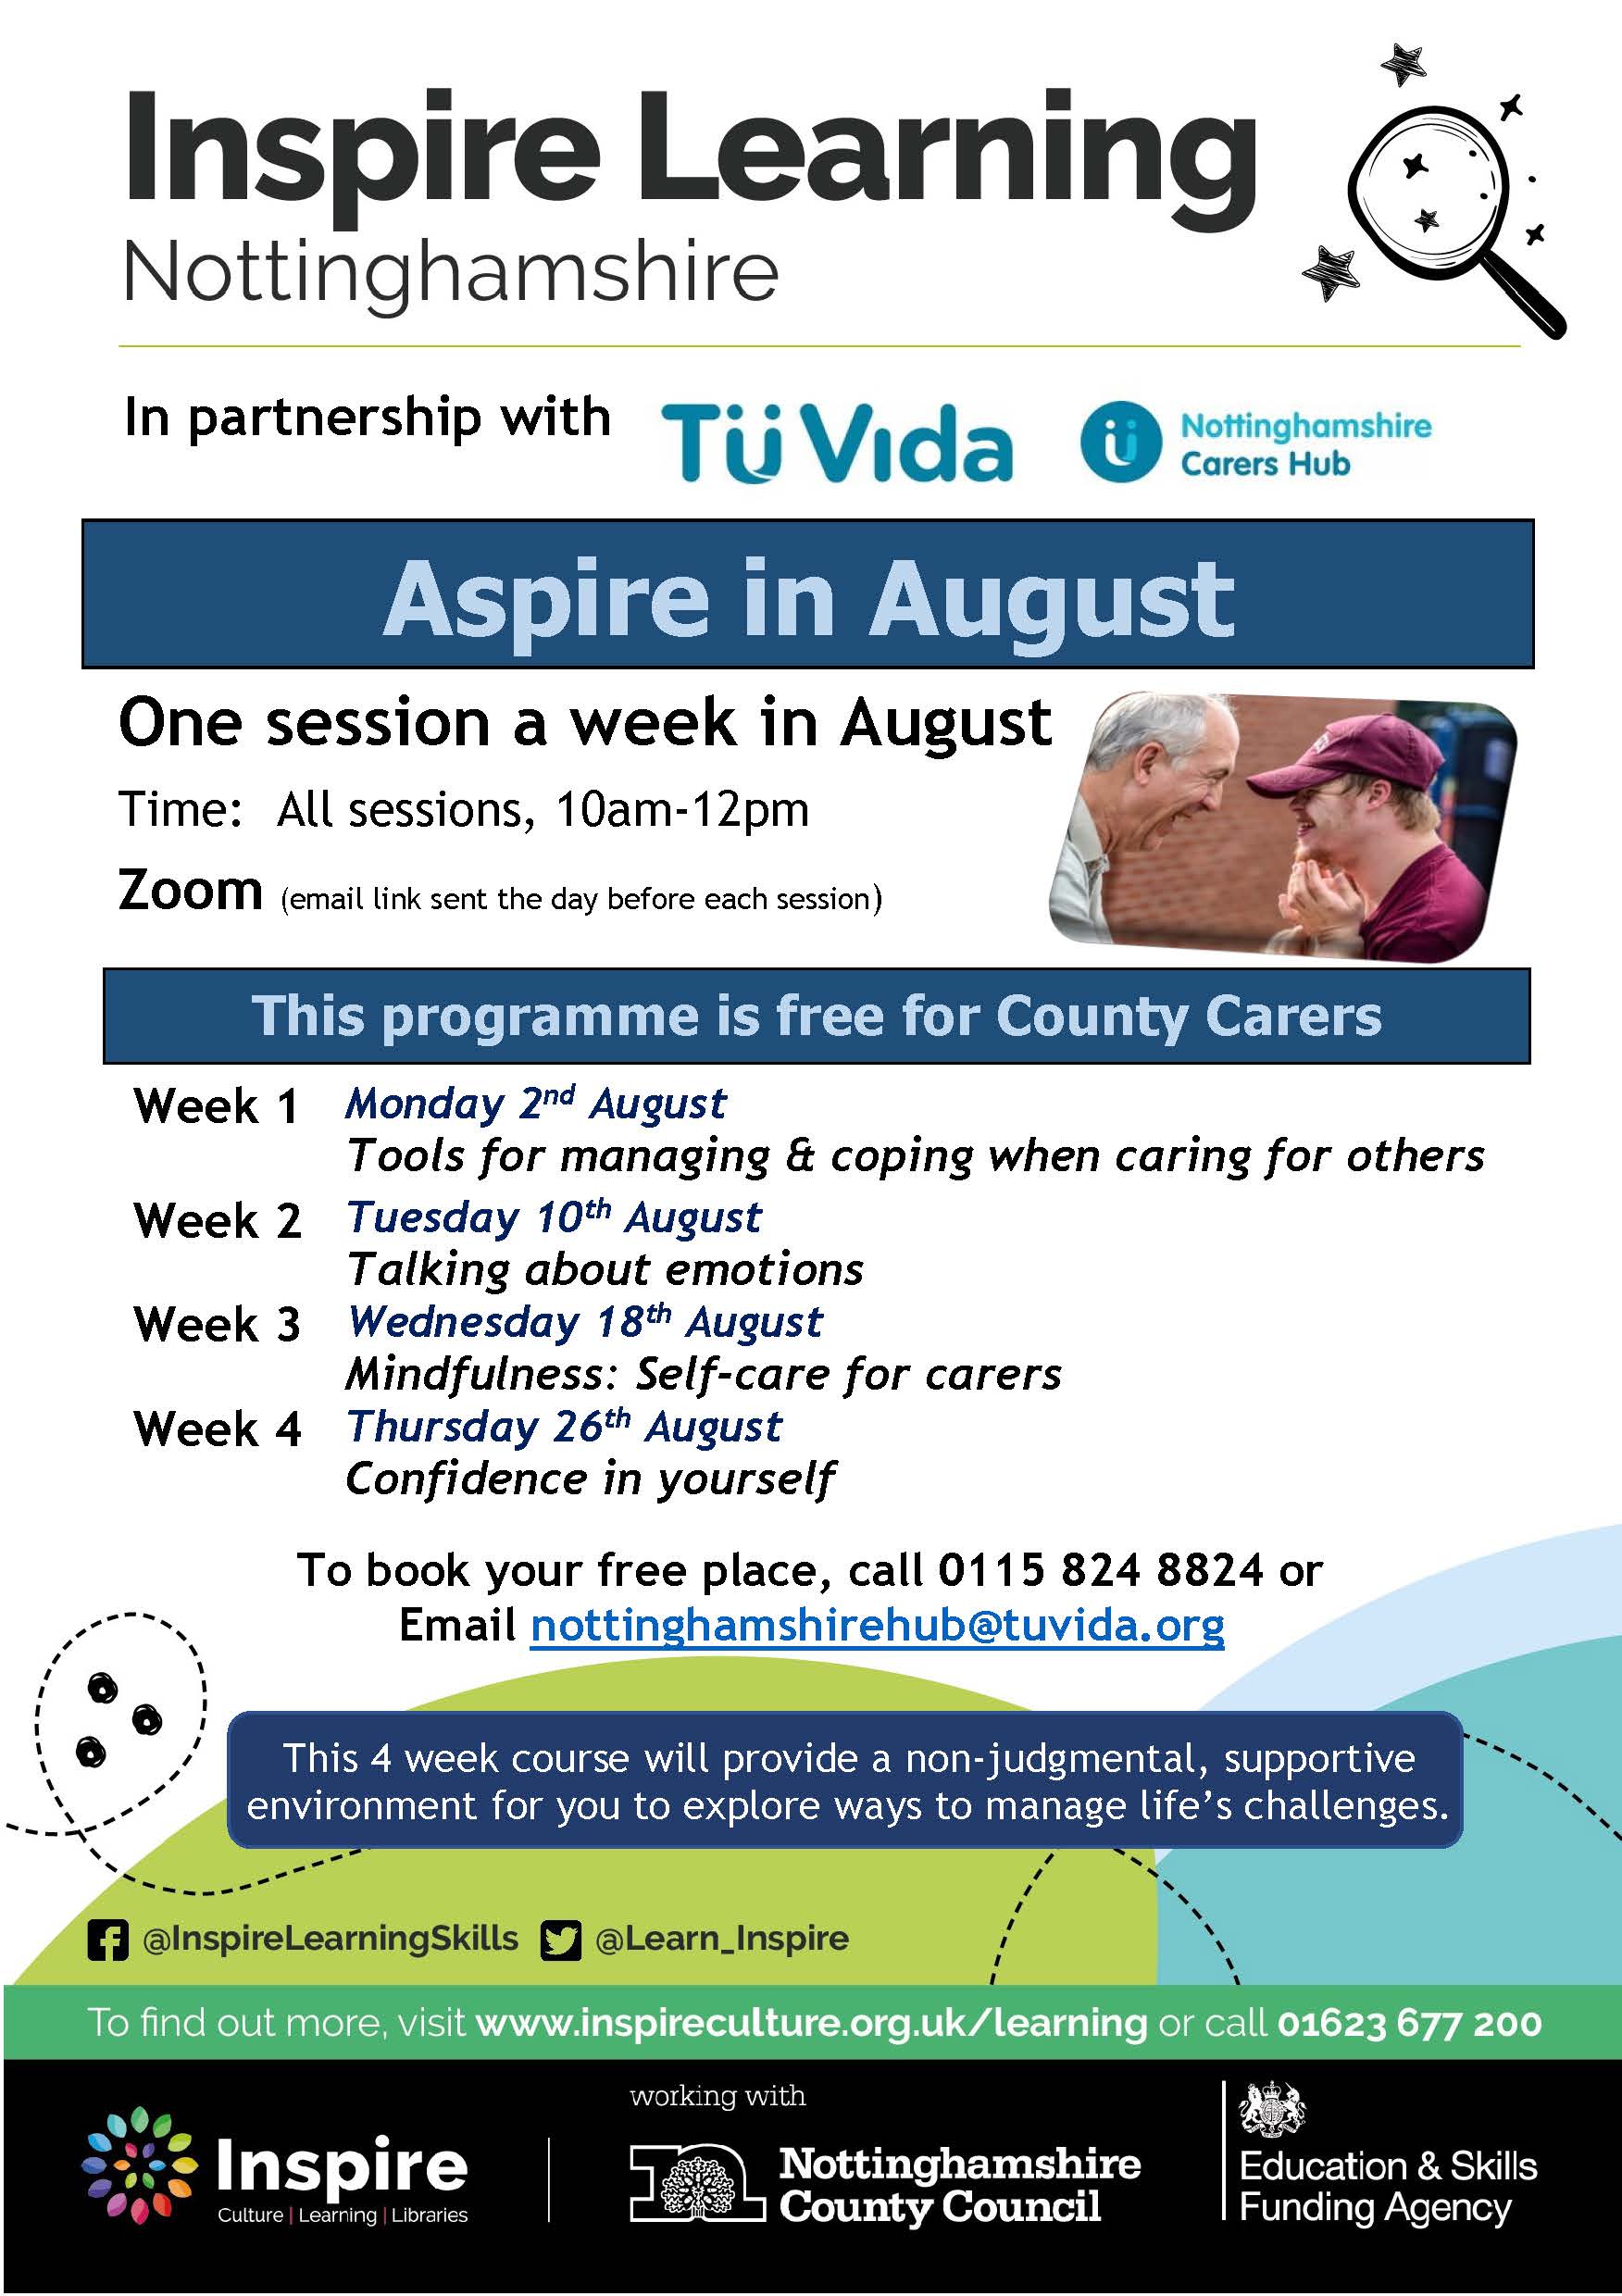 Inspire and Carers Hub Poster August 2021.jpg (368 KB)